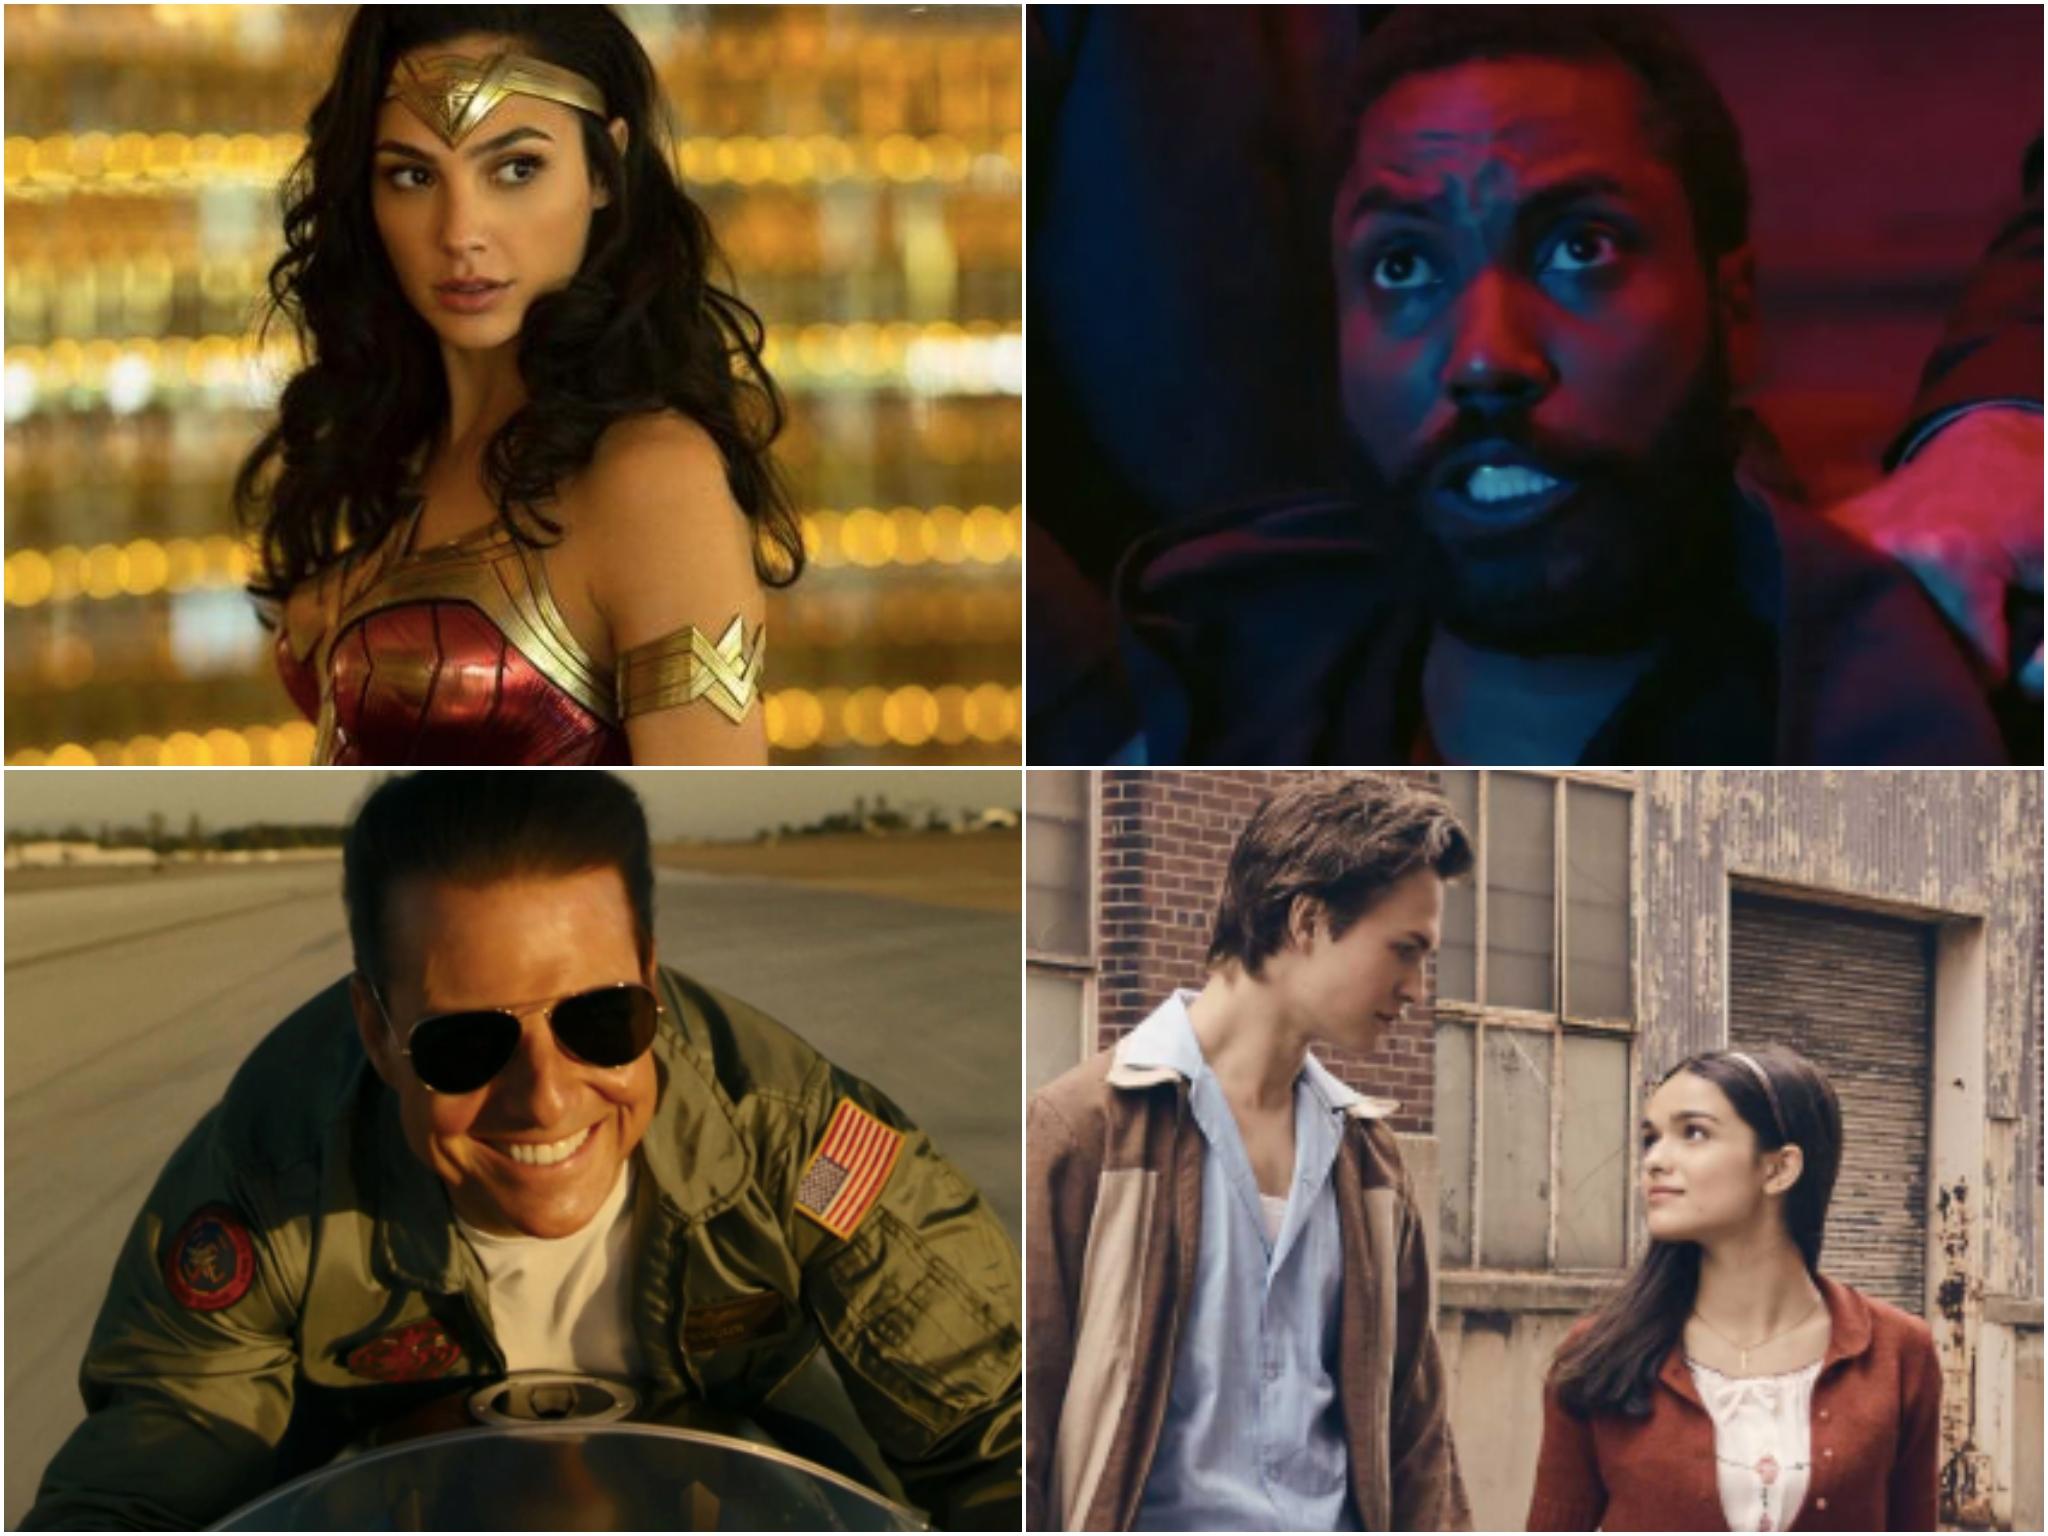 19 films to look out for in 2020, from horror film Antebellum to Marvel's The Eternals